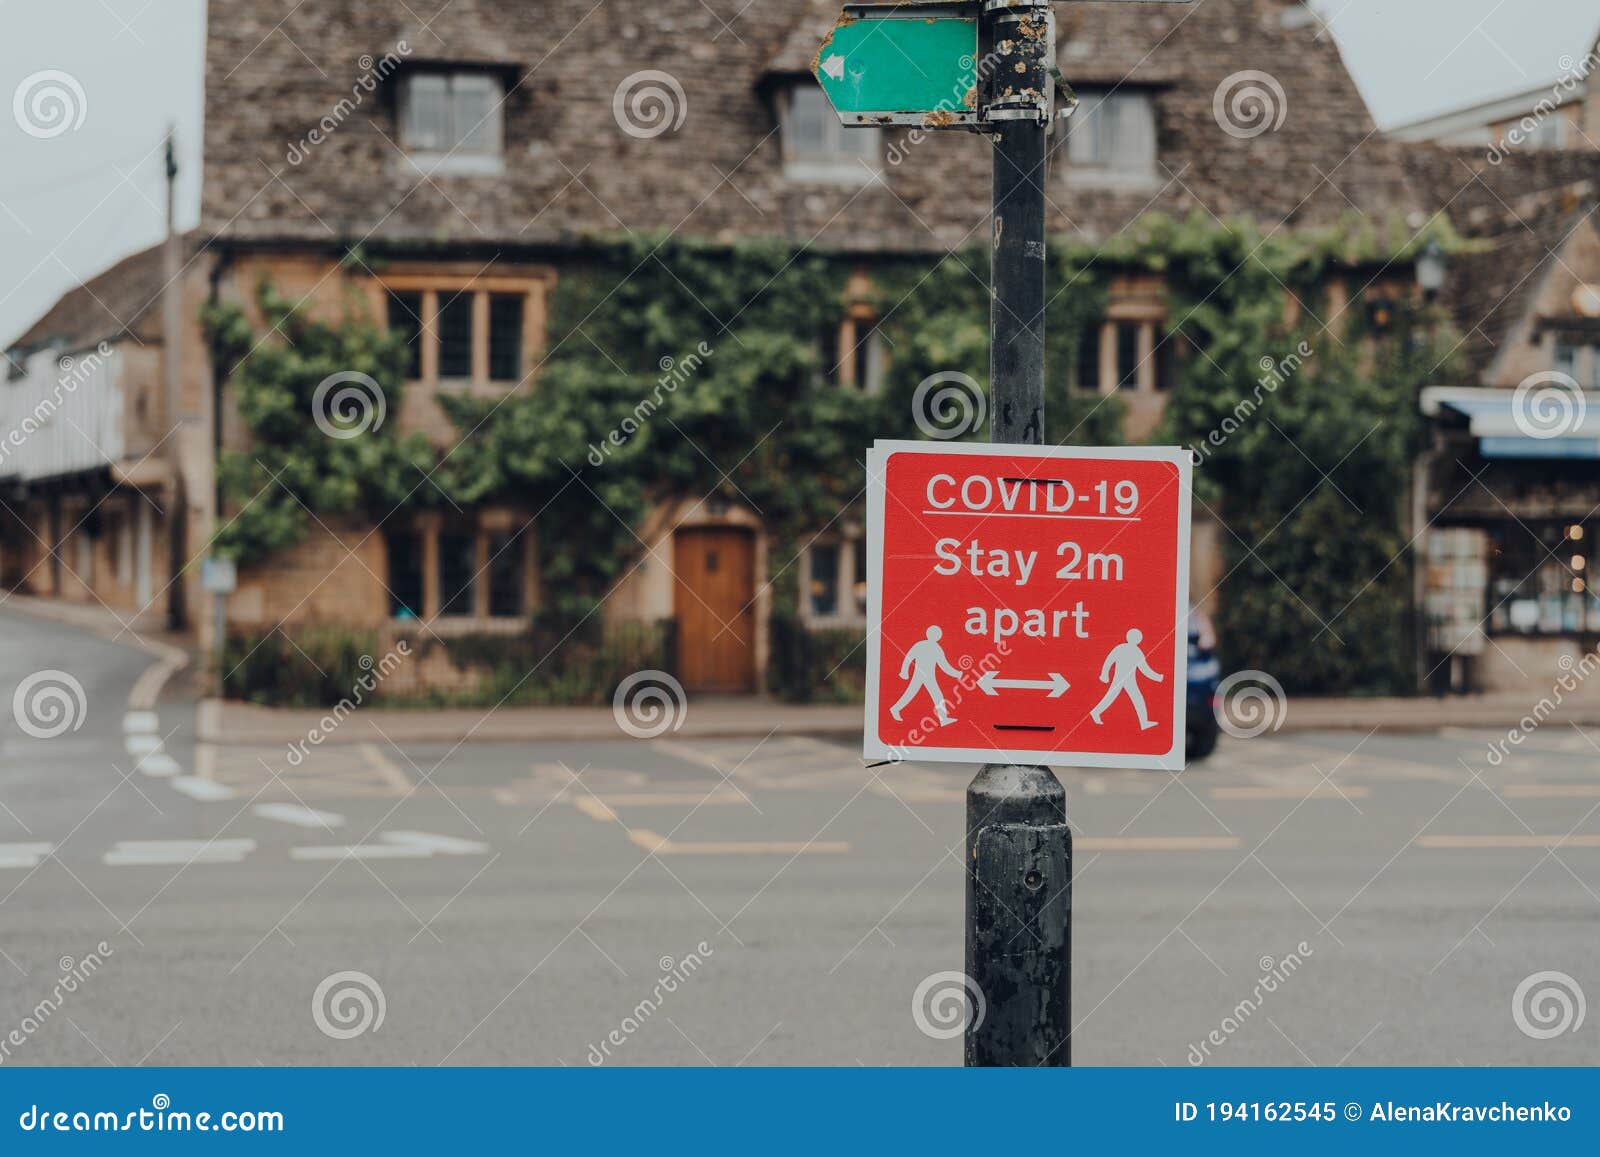 covid-19 stay 2 metres apart red sign on a street in bourton-on-water, cotswolds, uk